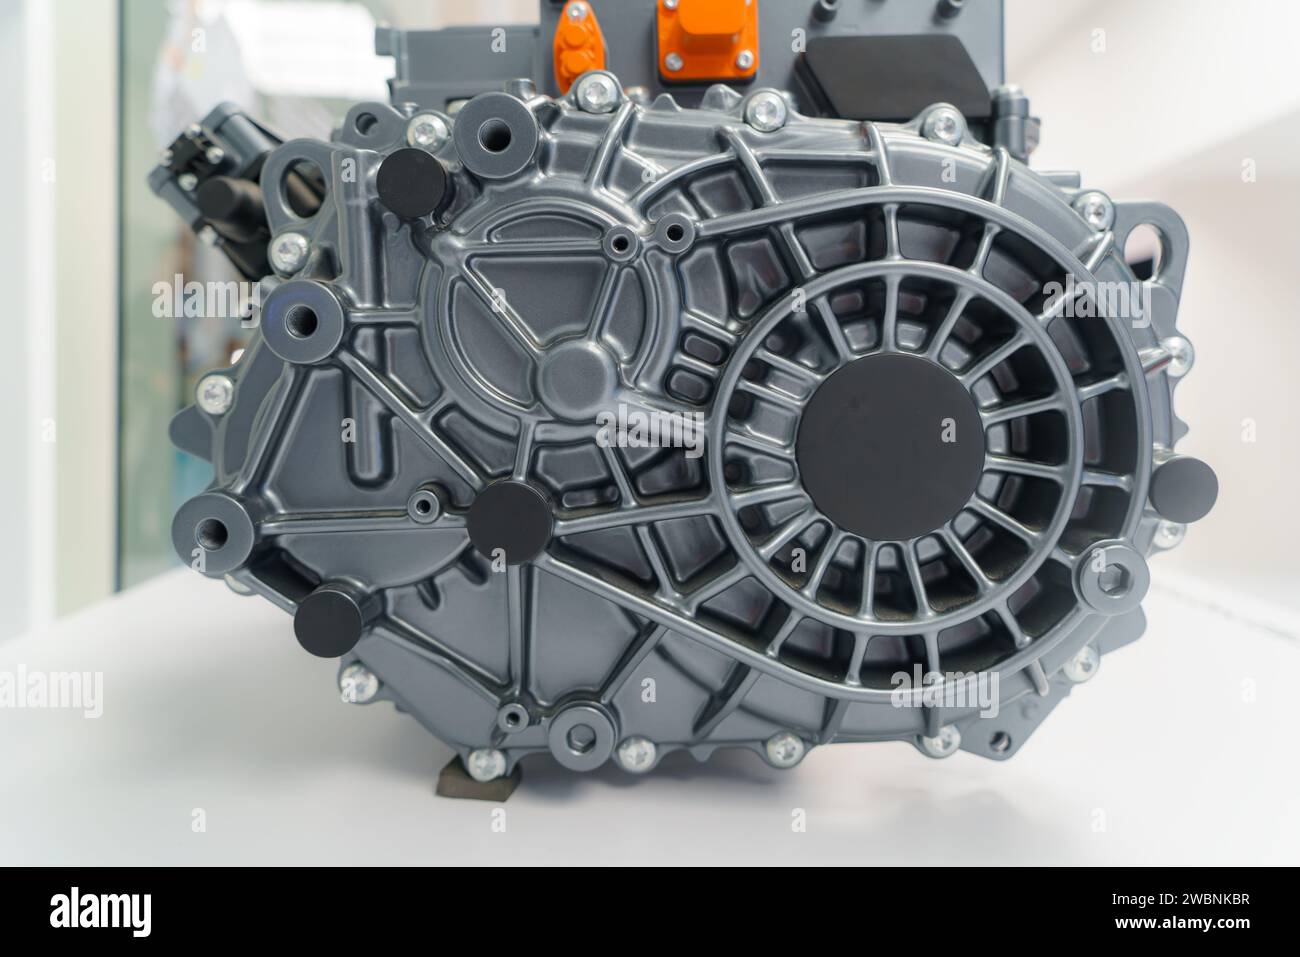 Powerful engine motor beneath the hood of an electric vehicle (EV). This glimpse captures the advanced technology driving the eco-friendly revolution, Stock Photo